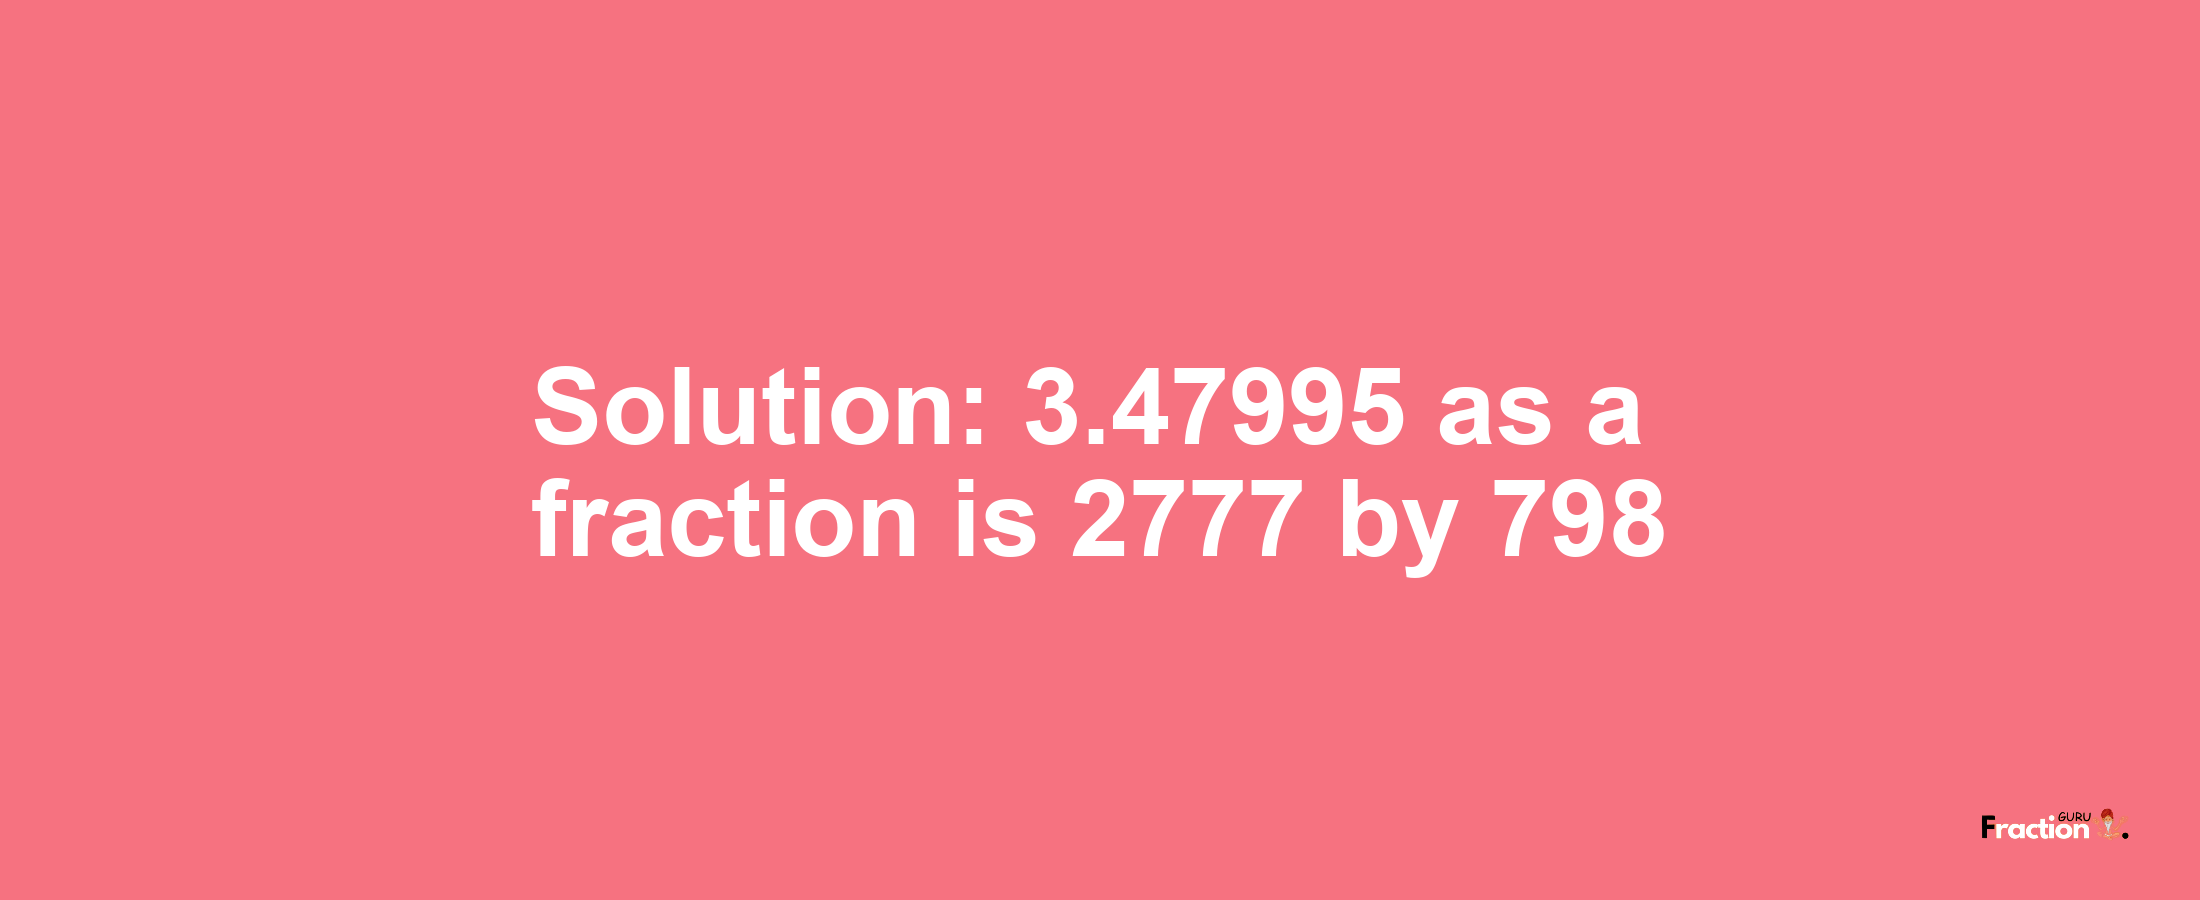 Solution:3.47995 as a fraction is 2777/798